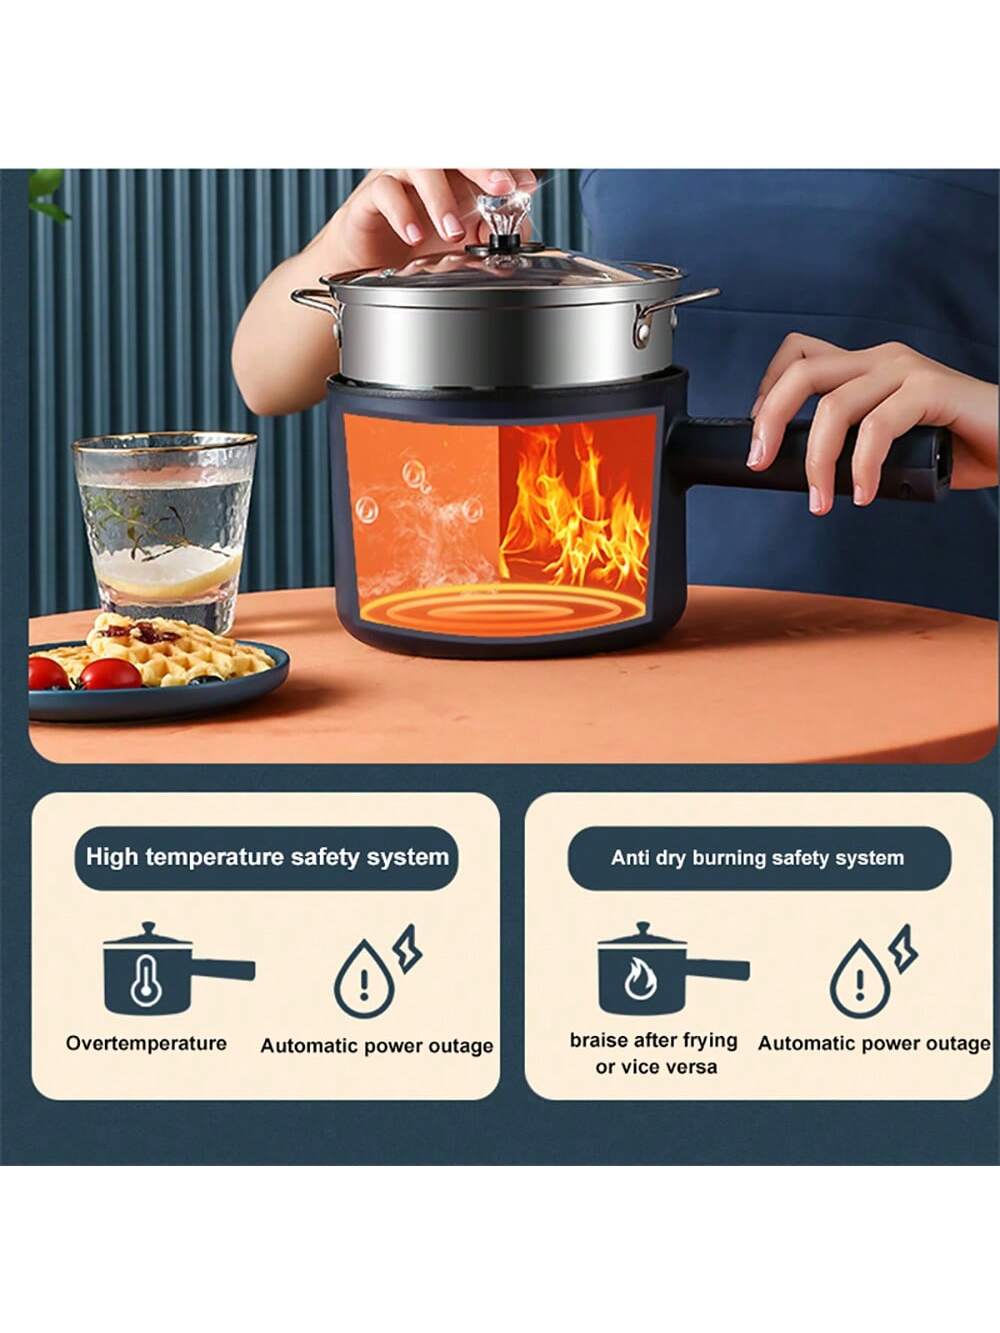 Multifunctional Electric Cooking Pot With Steamer, Non-stick Electric Fry Pan, 1-2 Person Mini Hot Pot Rice Cooker For Dormitory Student, Portable Outdoor Camping Heating Pot-Royal Blue-6